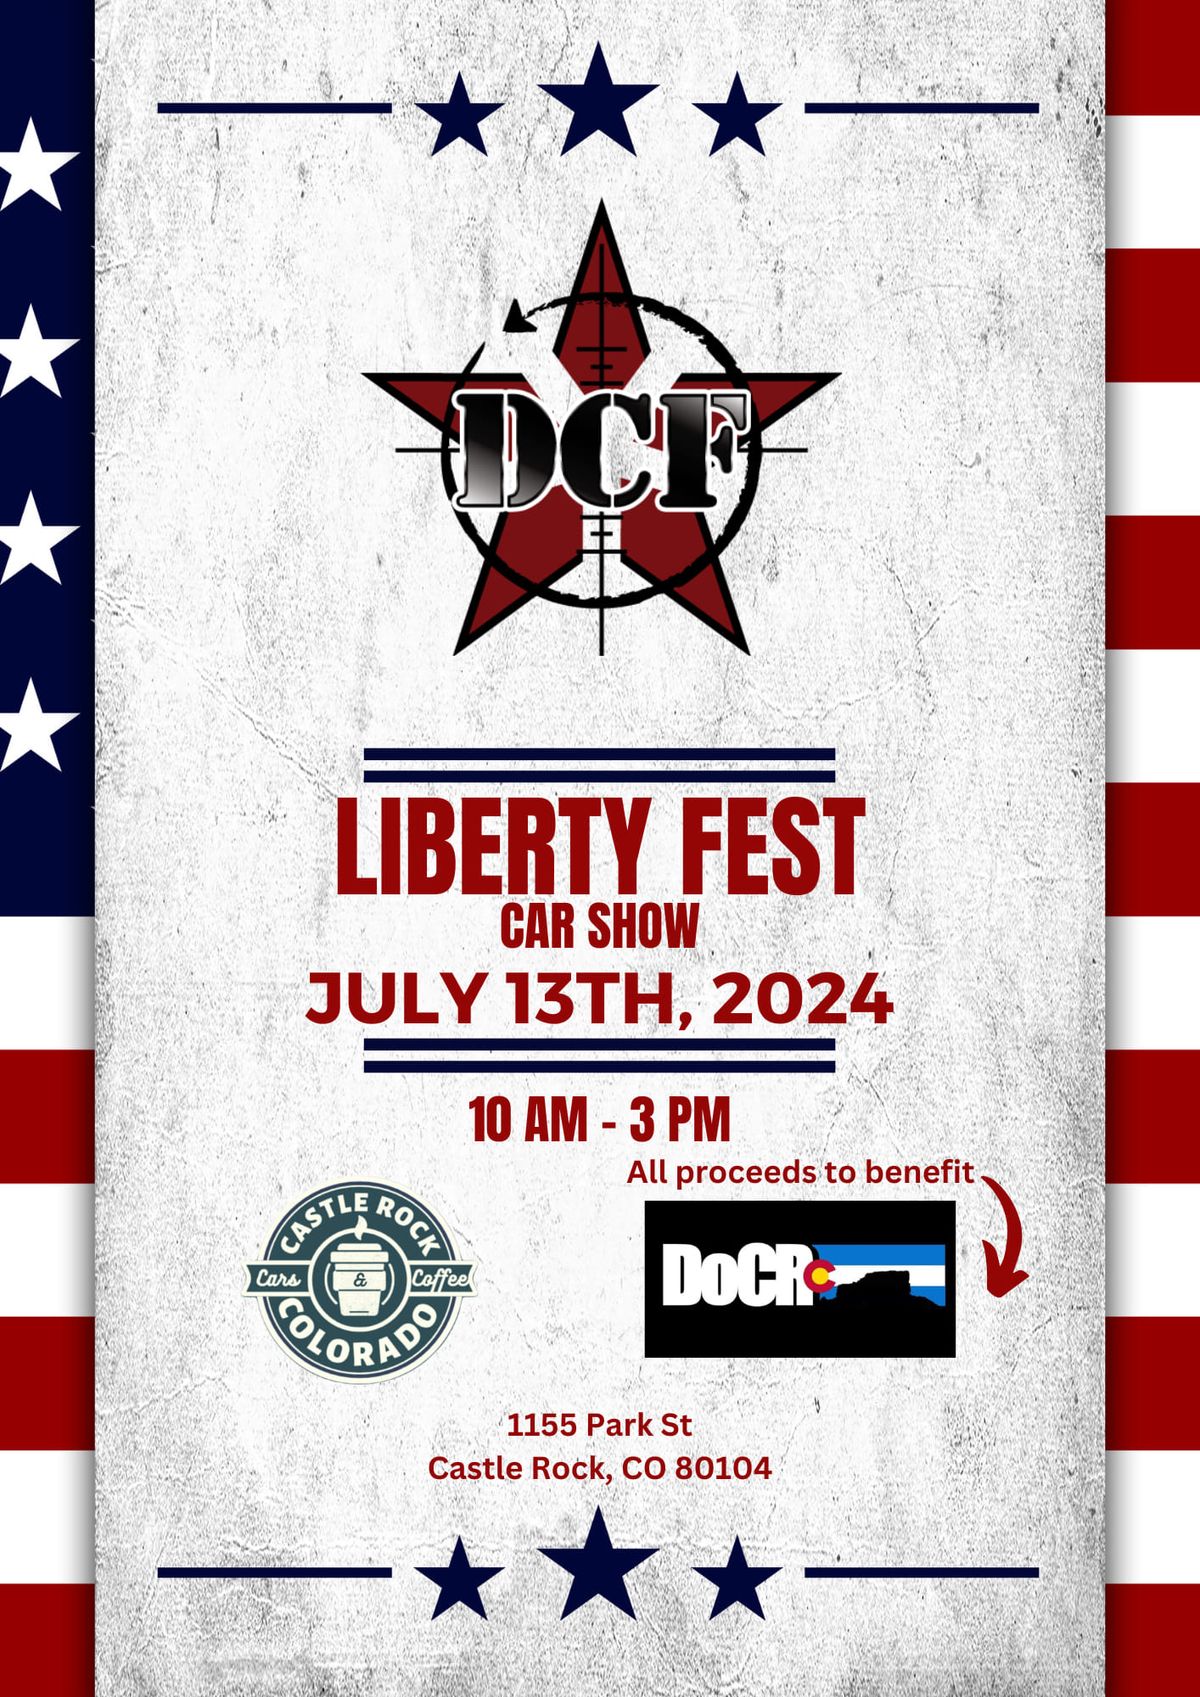 Liberty Fest Car Show benefiting DoCR 